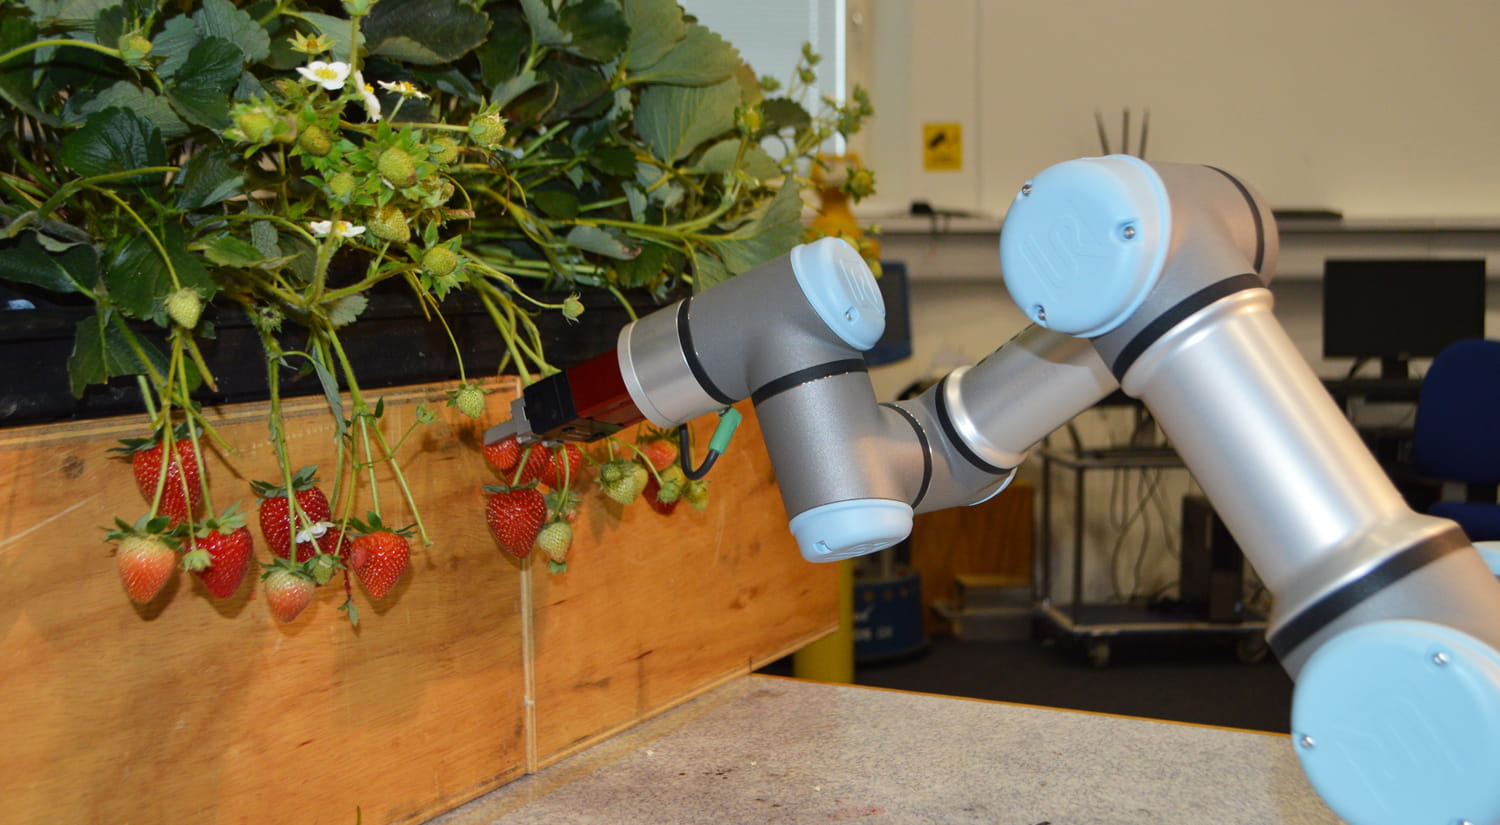 A photo of a state-of-the-art robot arm in silver and pale blue, reaching towards some strawberries on stems hanging over the edge of a wooden plant box.